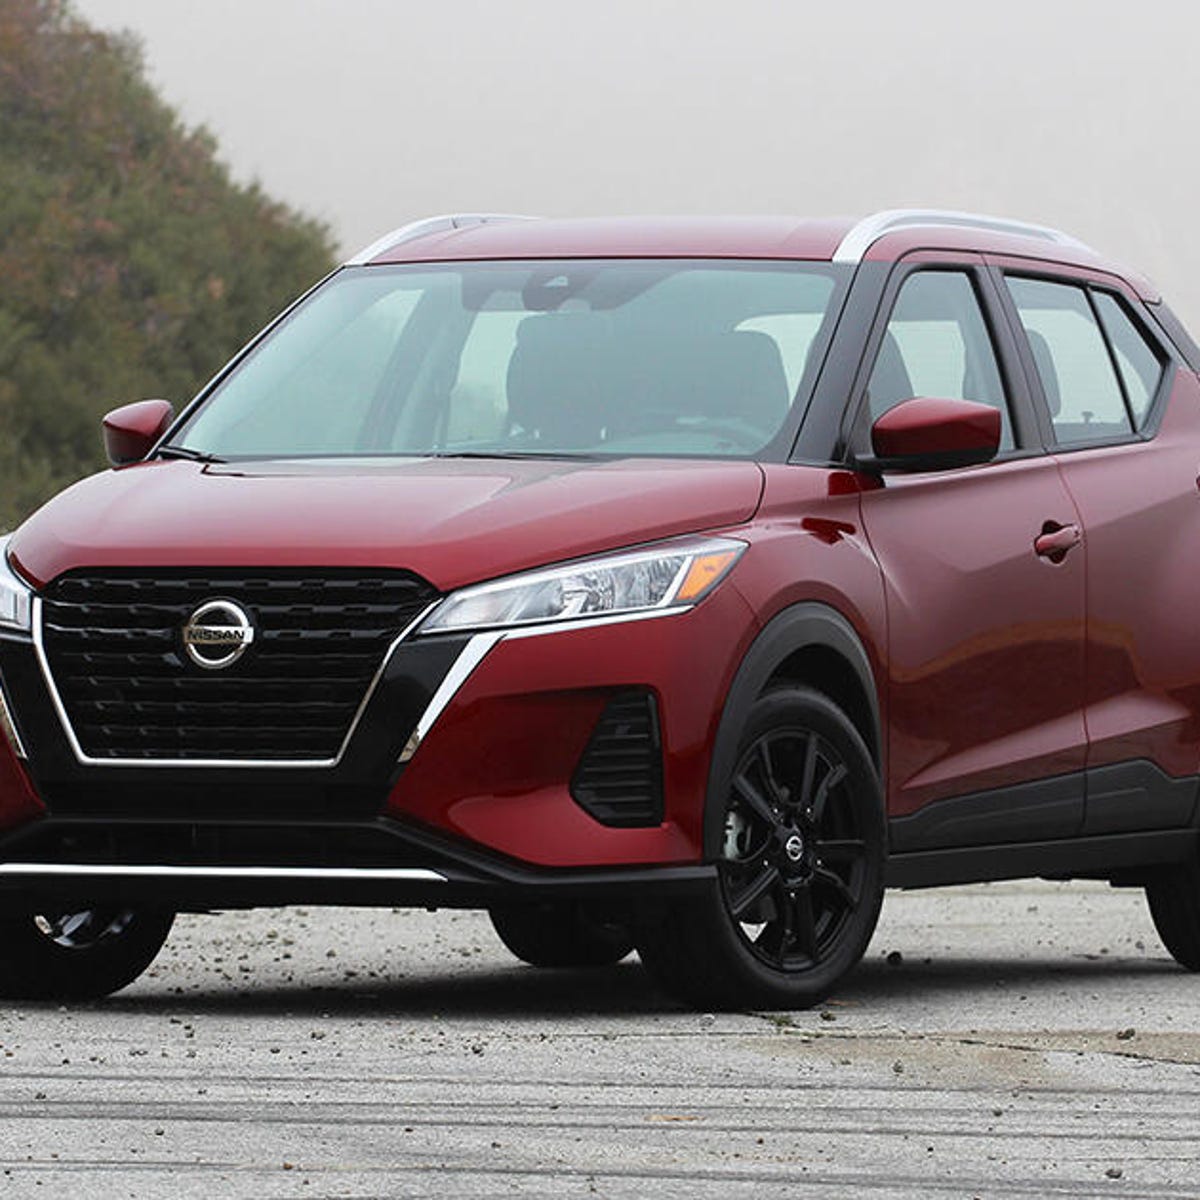 2021 Nissan Kicks review: The virtue of value - CNET